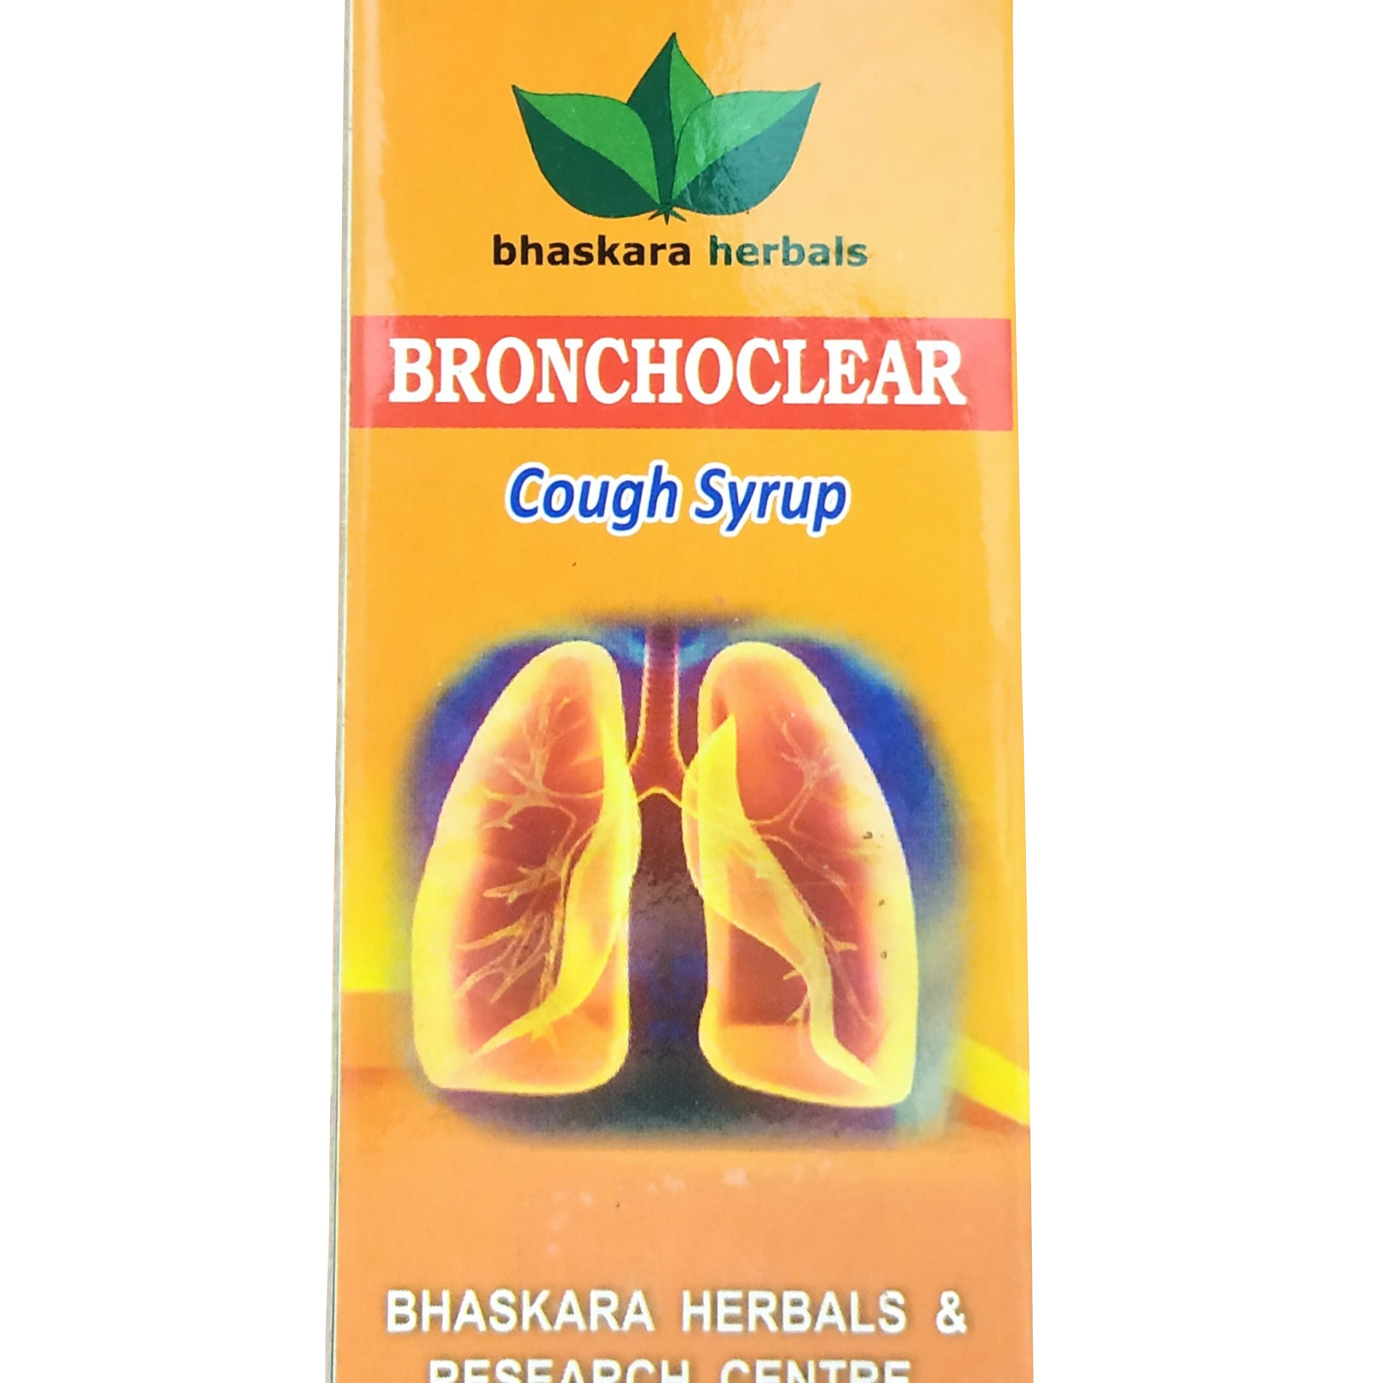 Shop Bronchoclear cough syrup 100ml at price 80.00 from Bhaskara Herbals Online - Ayush Care